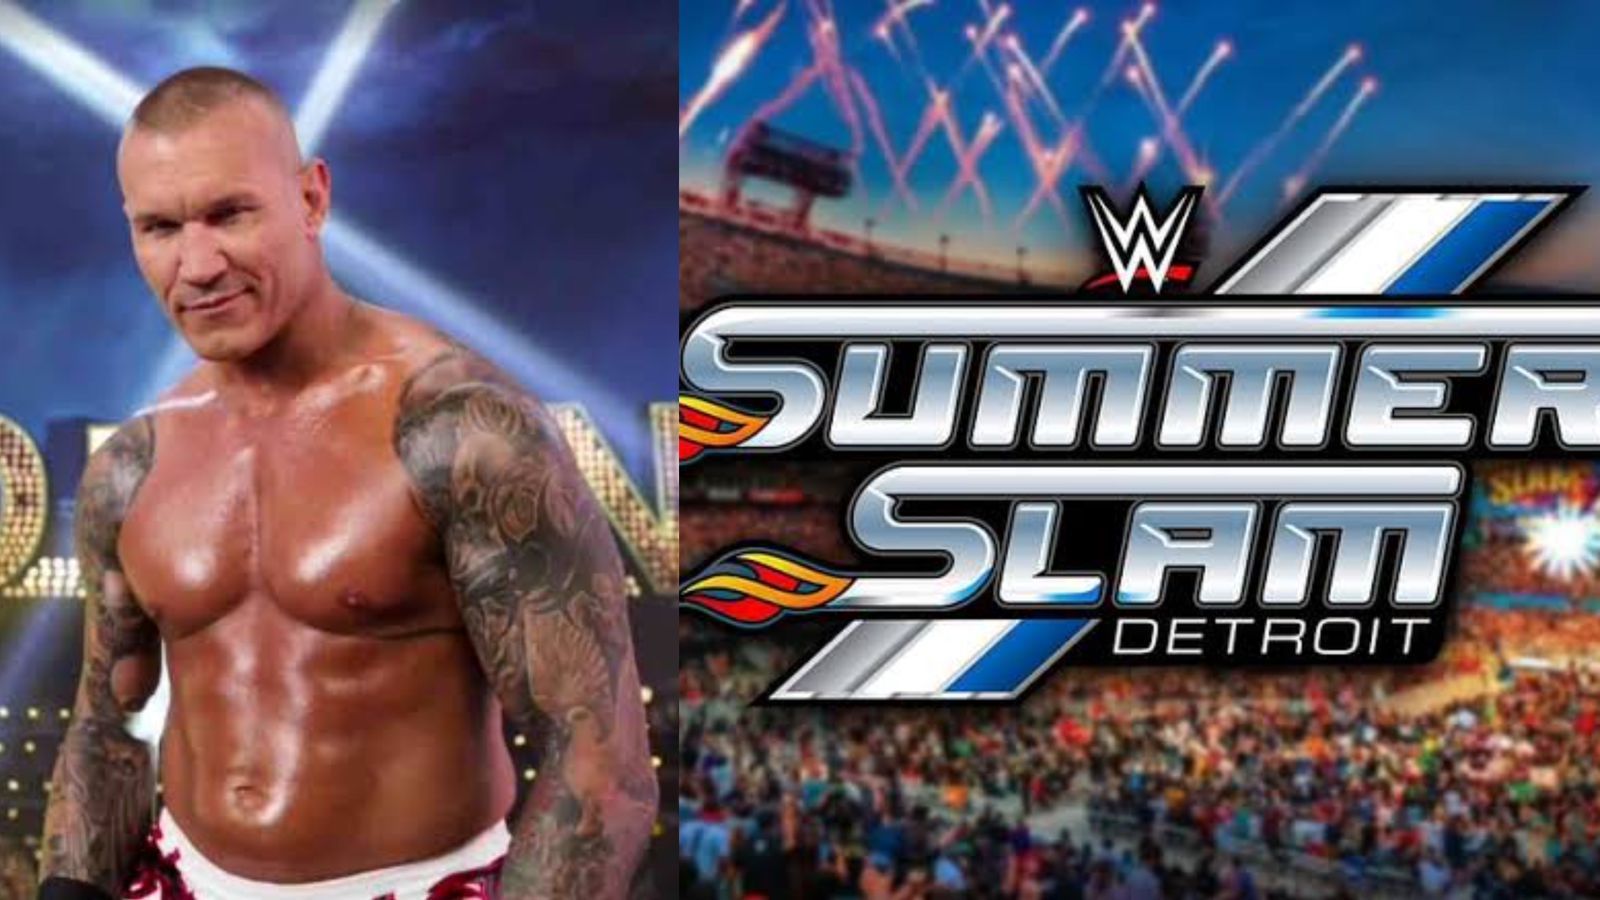 Many have been expecting to see Randy Orton return at SummerSlam!